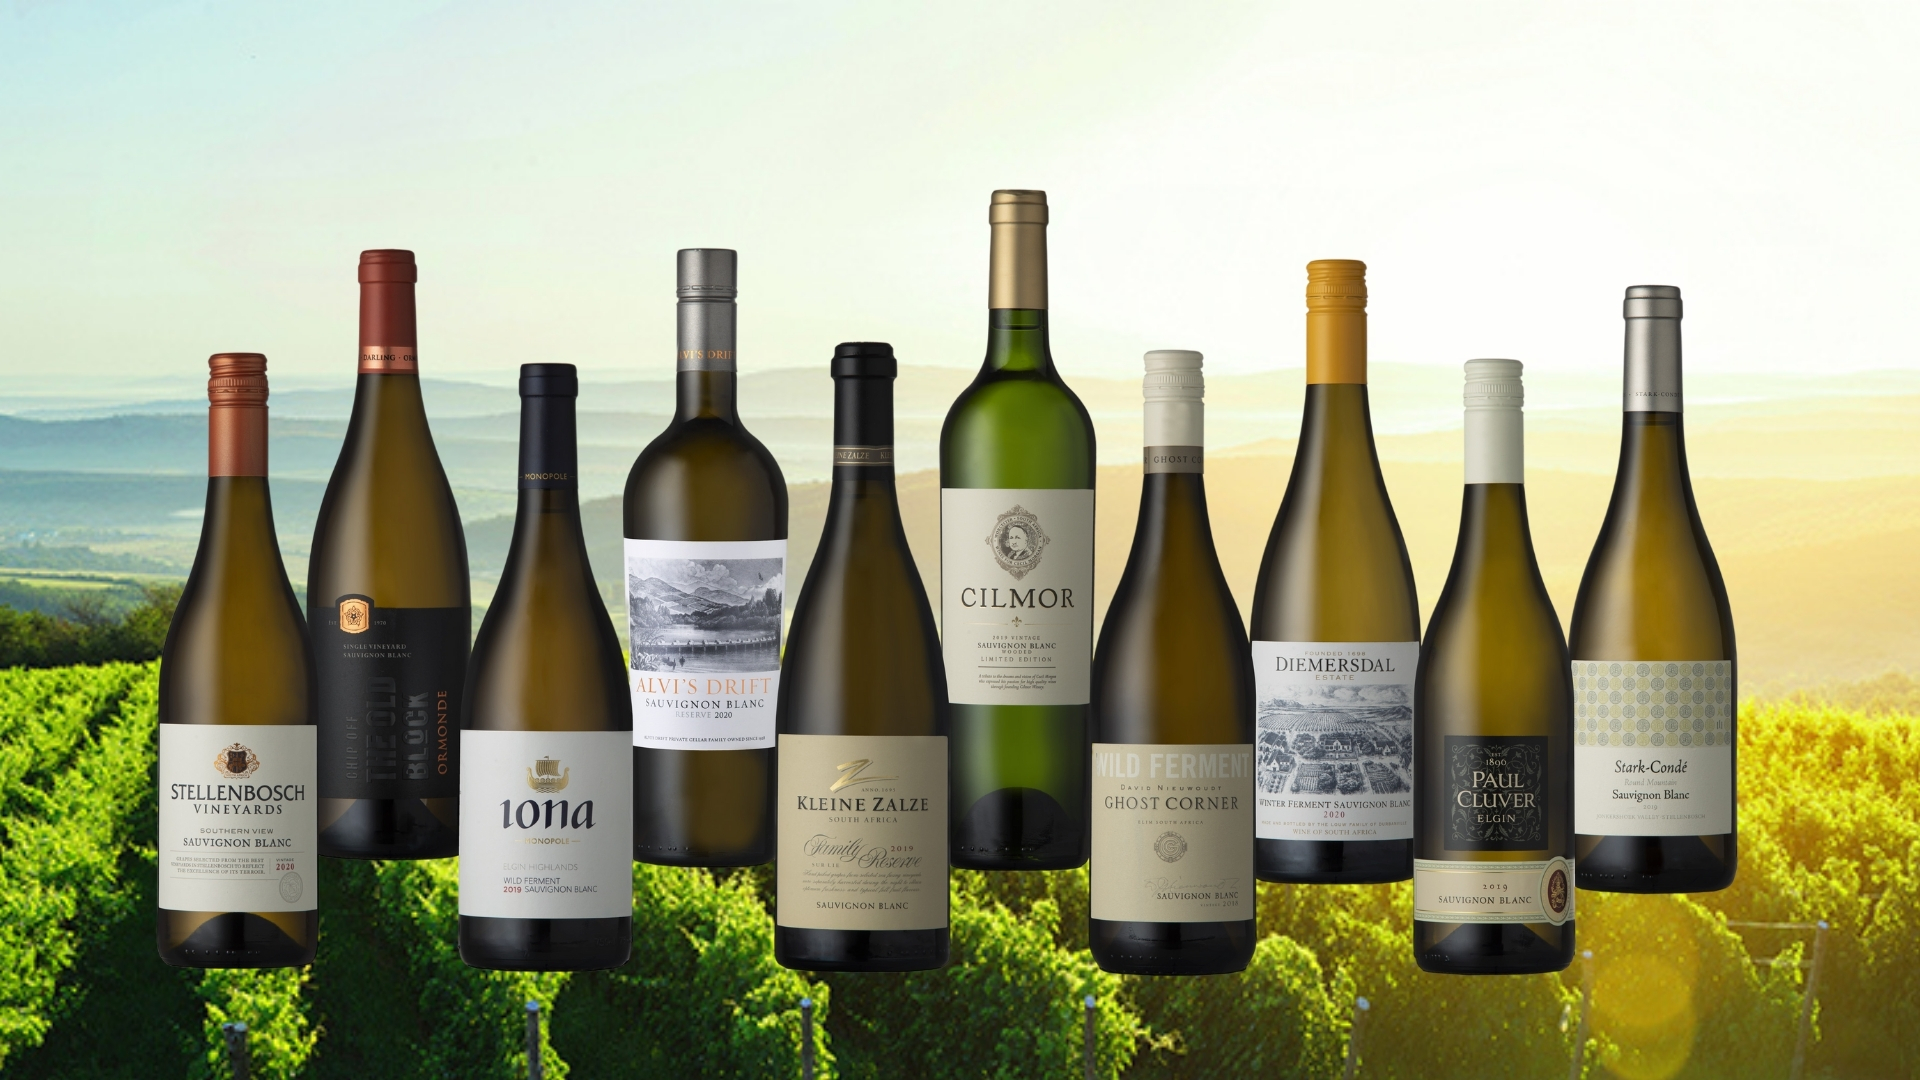 Top 10 Sauvignon Blanc Wines In South Africa For 2020 photo